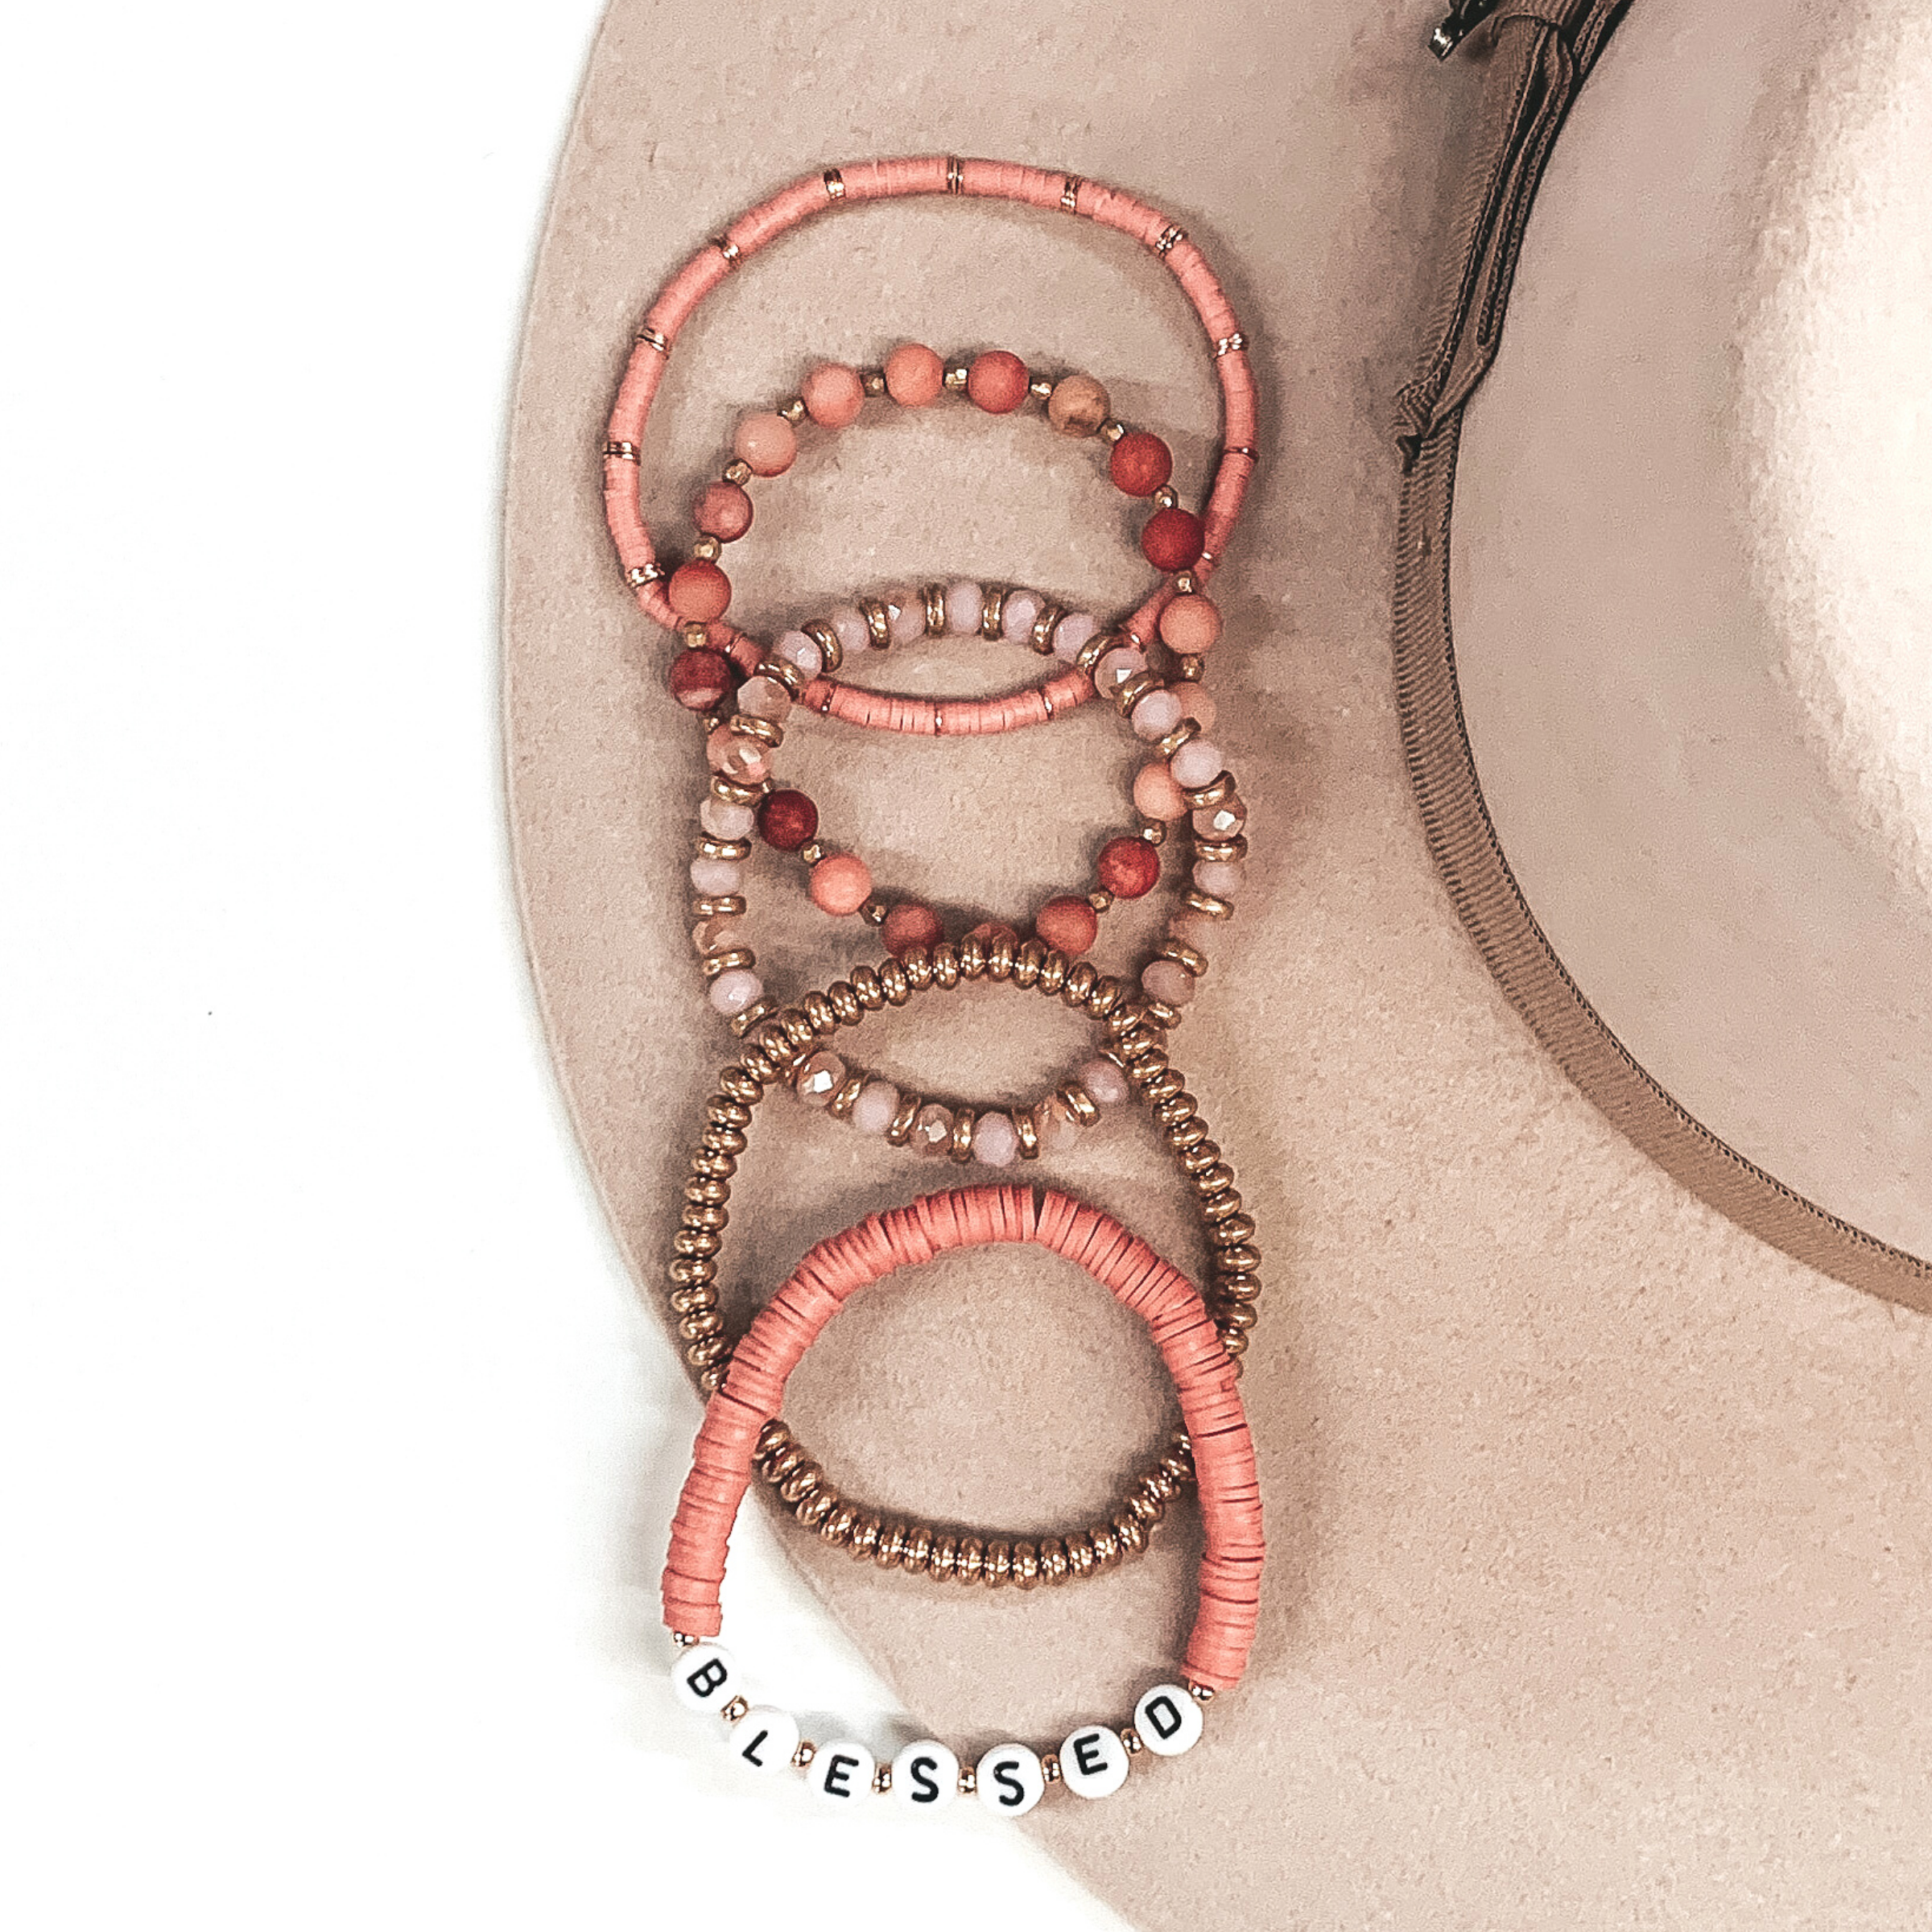 This bracelet set has a mix of blush disk beaded bracelets, blush circle beaded bracelet, a gold beaded bracelet, and a blush crystal beaded bracelet. One of the blush disk beaded bracelet has letter beads that spell out "BLESSED." These bracelets are pictured on a white and beige background.